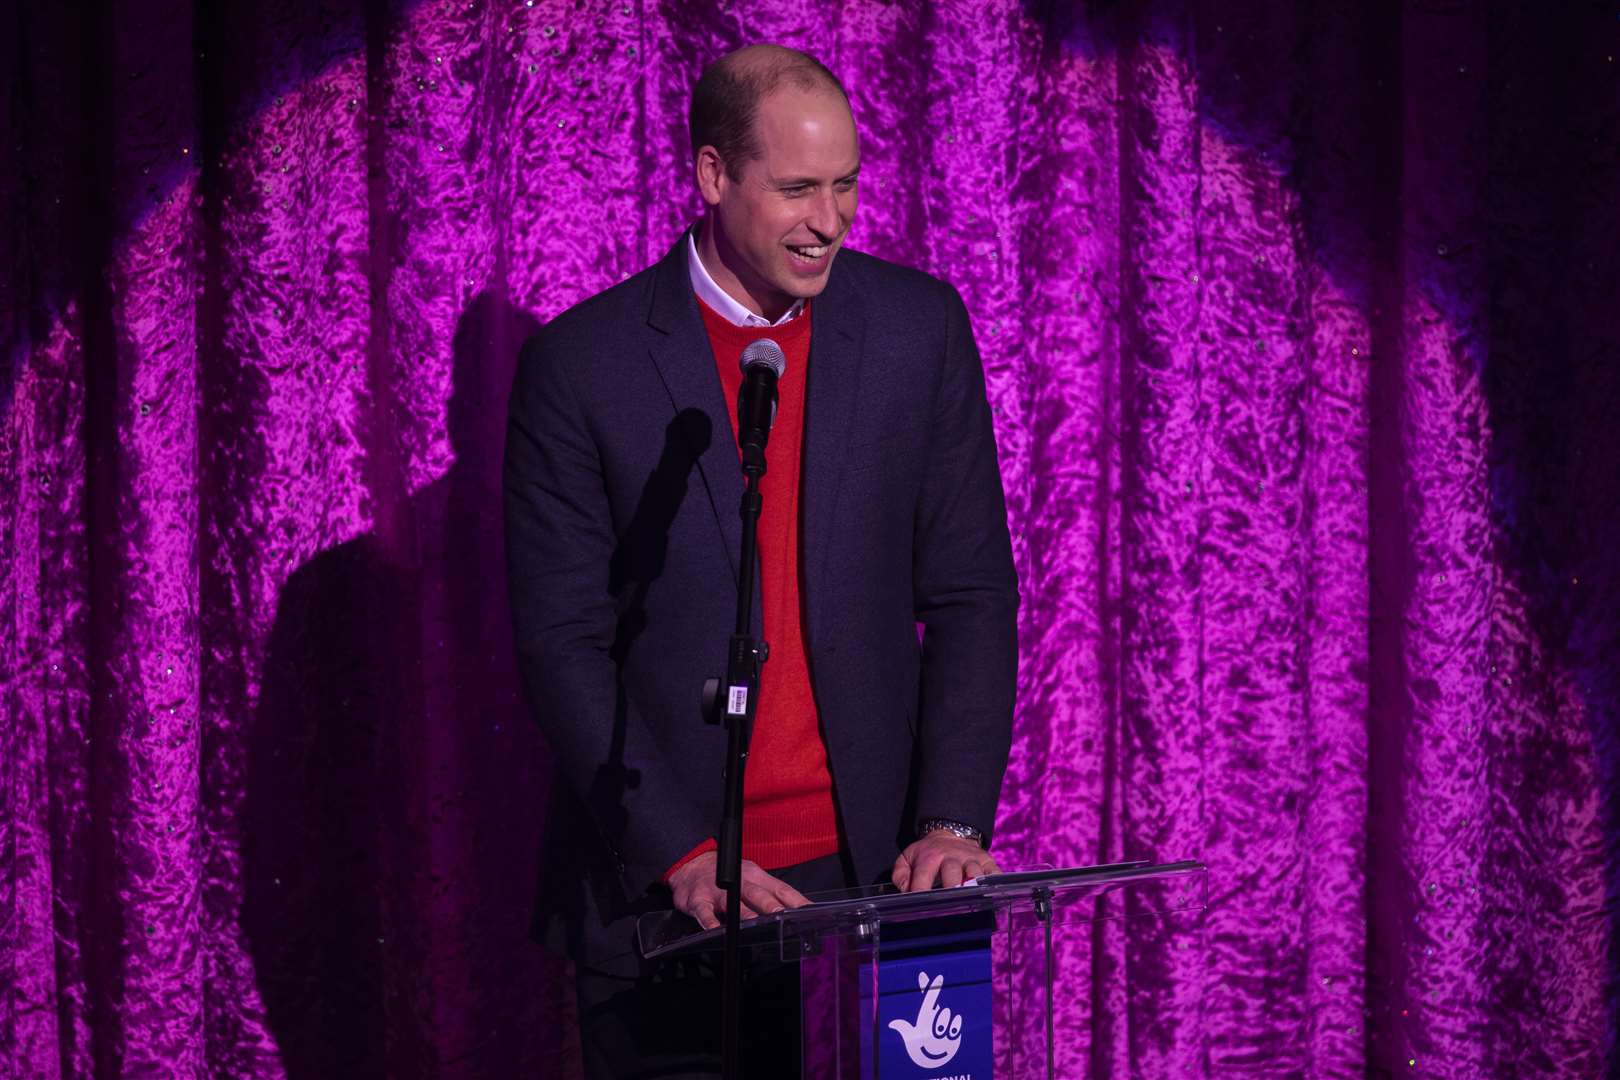 The Duke of Cambridge gives a speech on stage (Aaron Chown/PA)